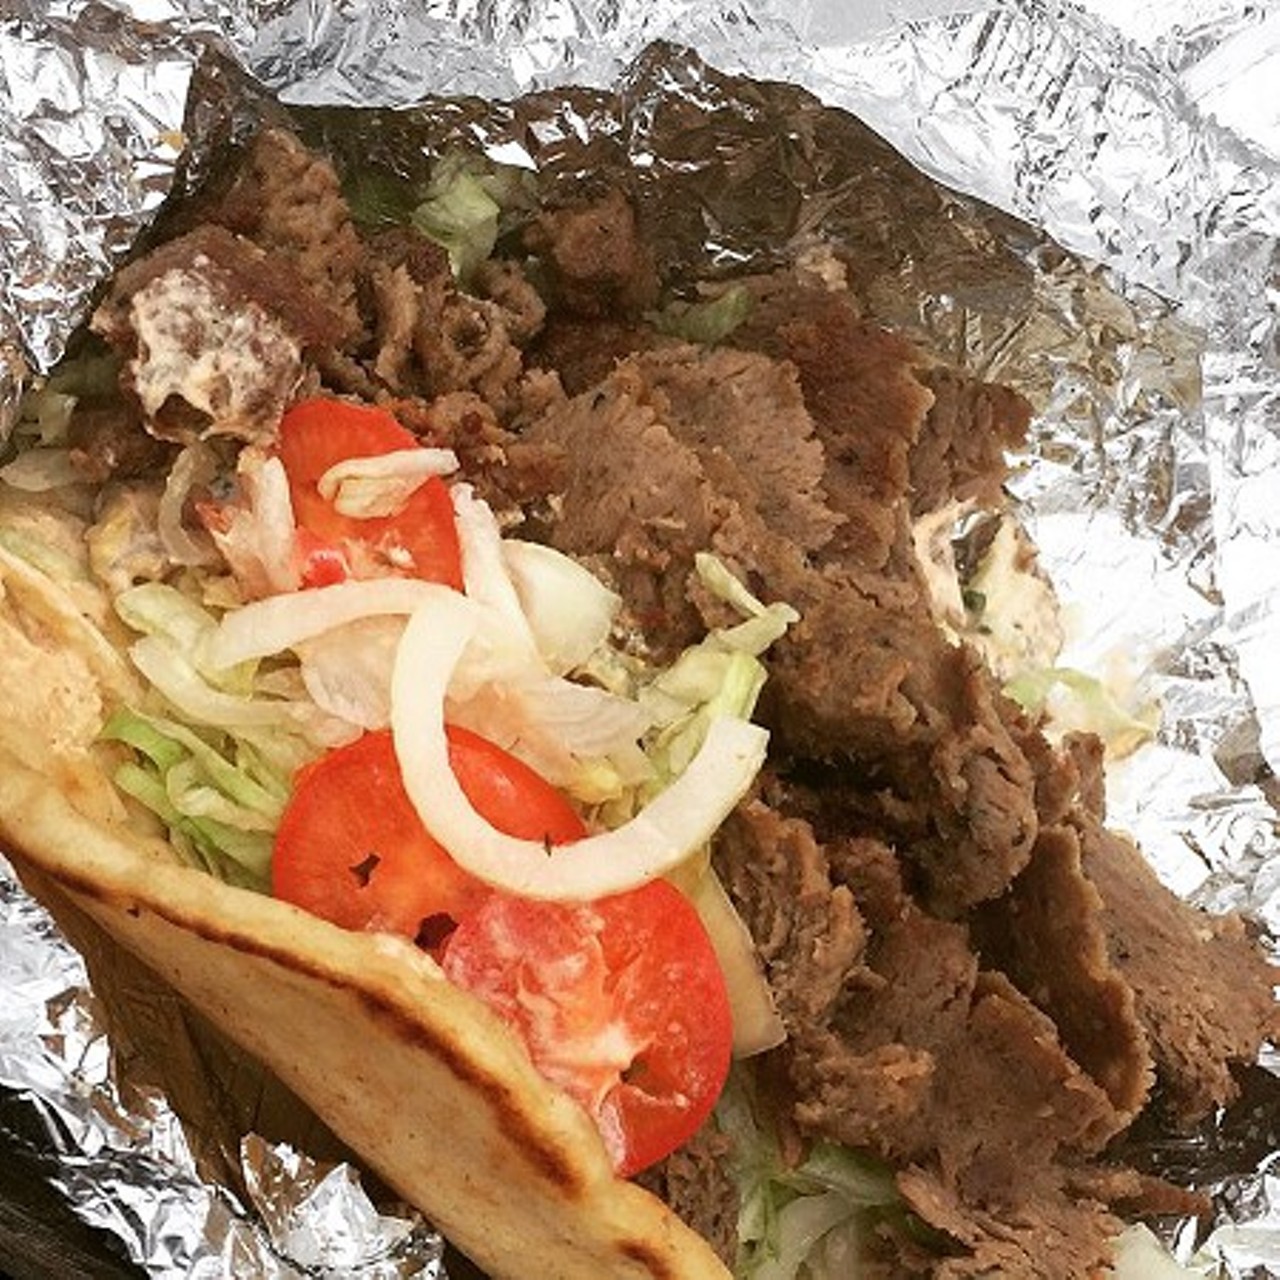 Steve's Gyros - 
Grab a small gyro (it's still huge) for only $8 at Steve's Gyros. Find his stall at the West Side Market. (Photo via Jessica Morell, Instagram)